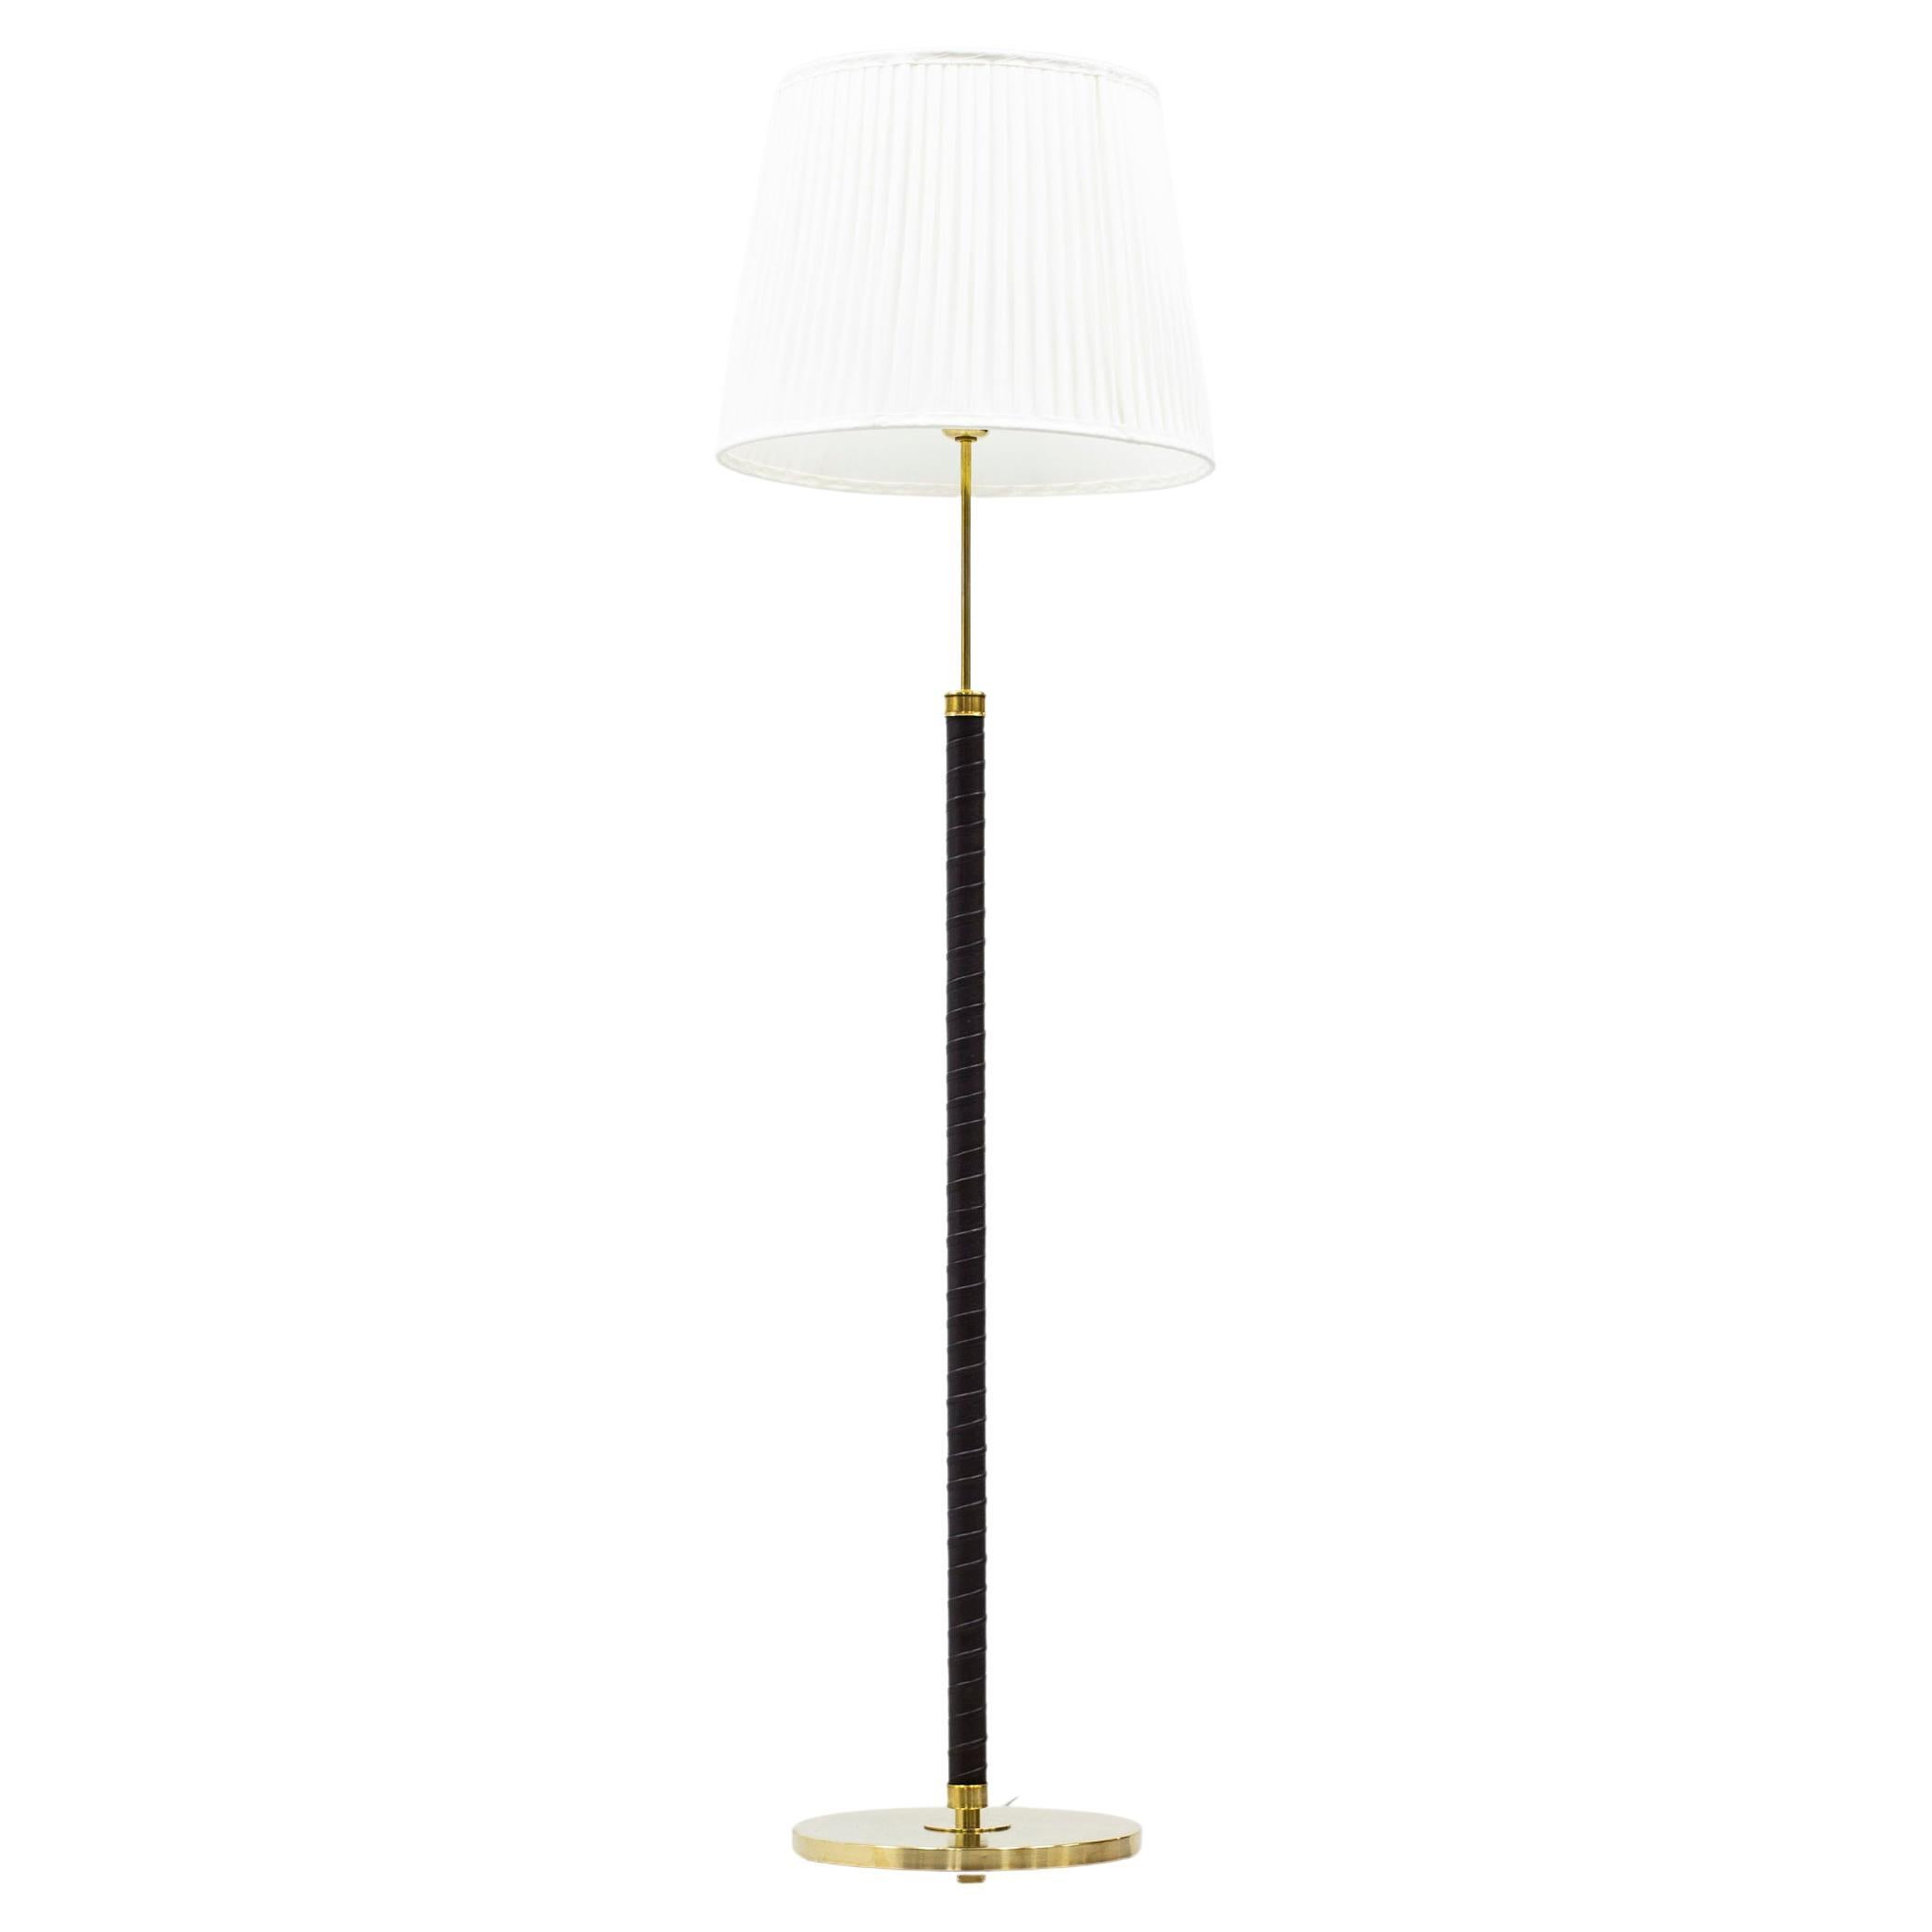 Floor Lamp in Brass and Leather by ASEA, Sweden, 1940s